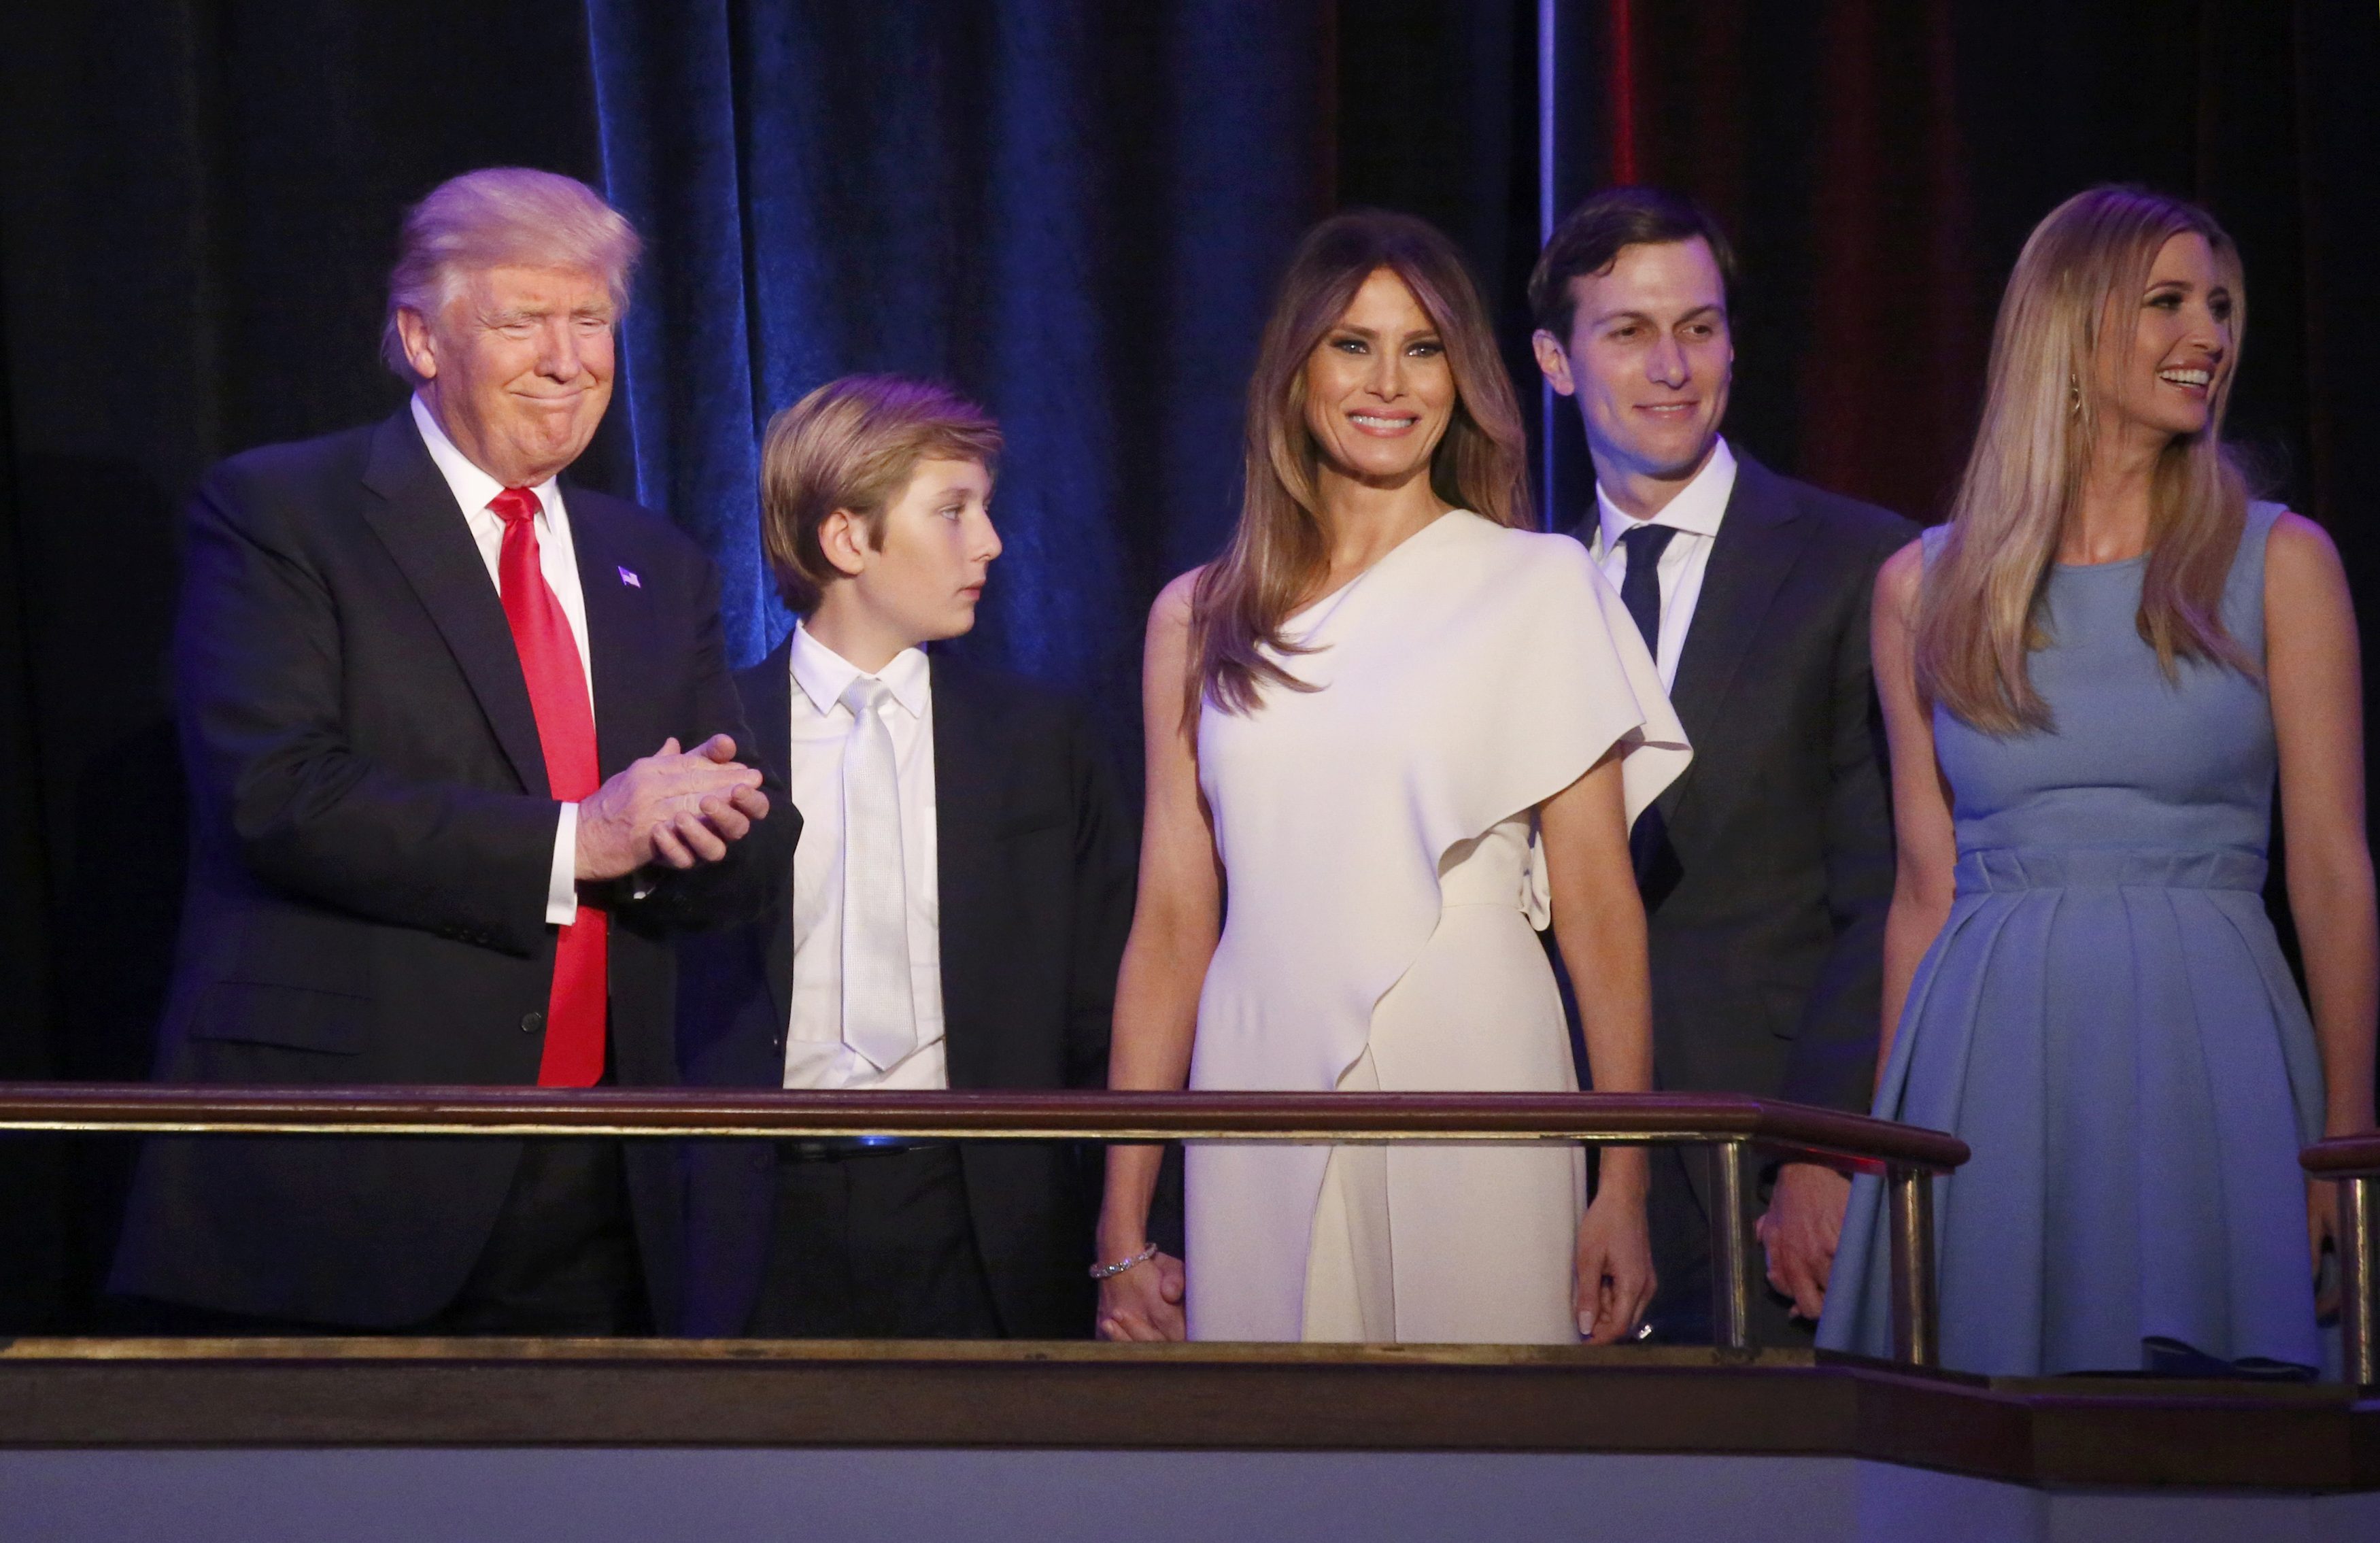 Republican U.S. president-elect Donald Trump stands with his son Barron (C), wife Melania, son-in-law Jared Kushner and daughter Ivanka Trump at his election night rally in Manhattan, New York, U.S., November 9, 2016. REUTERS/Carlo Allegrin